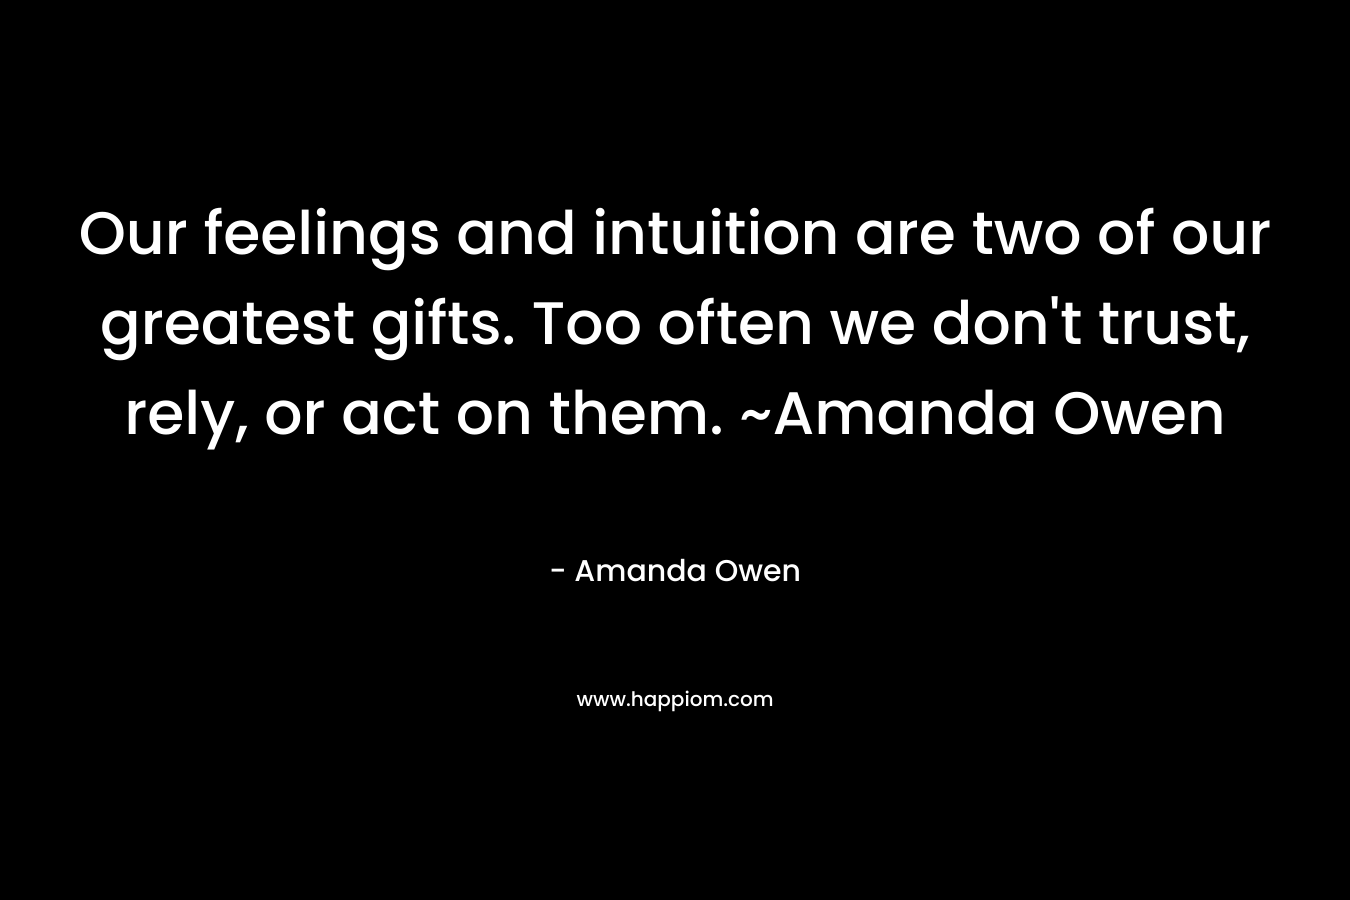 Our feelings and intuition are two of our greatest gifts. Too often we don't trust, rely, or act on them. ~Amanda Owen